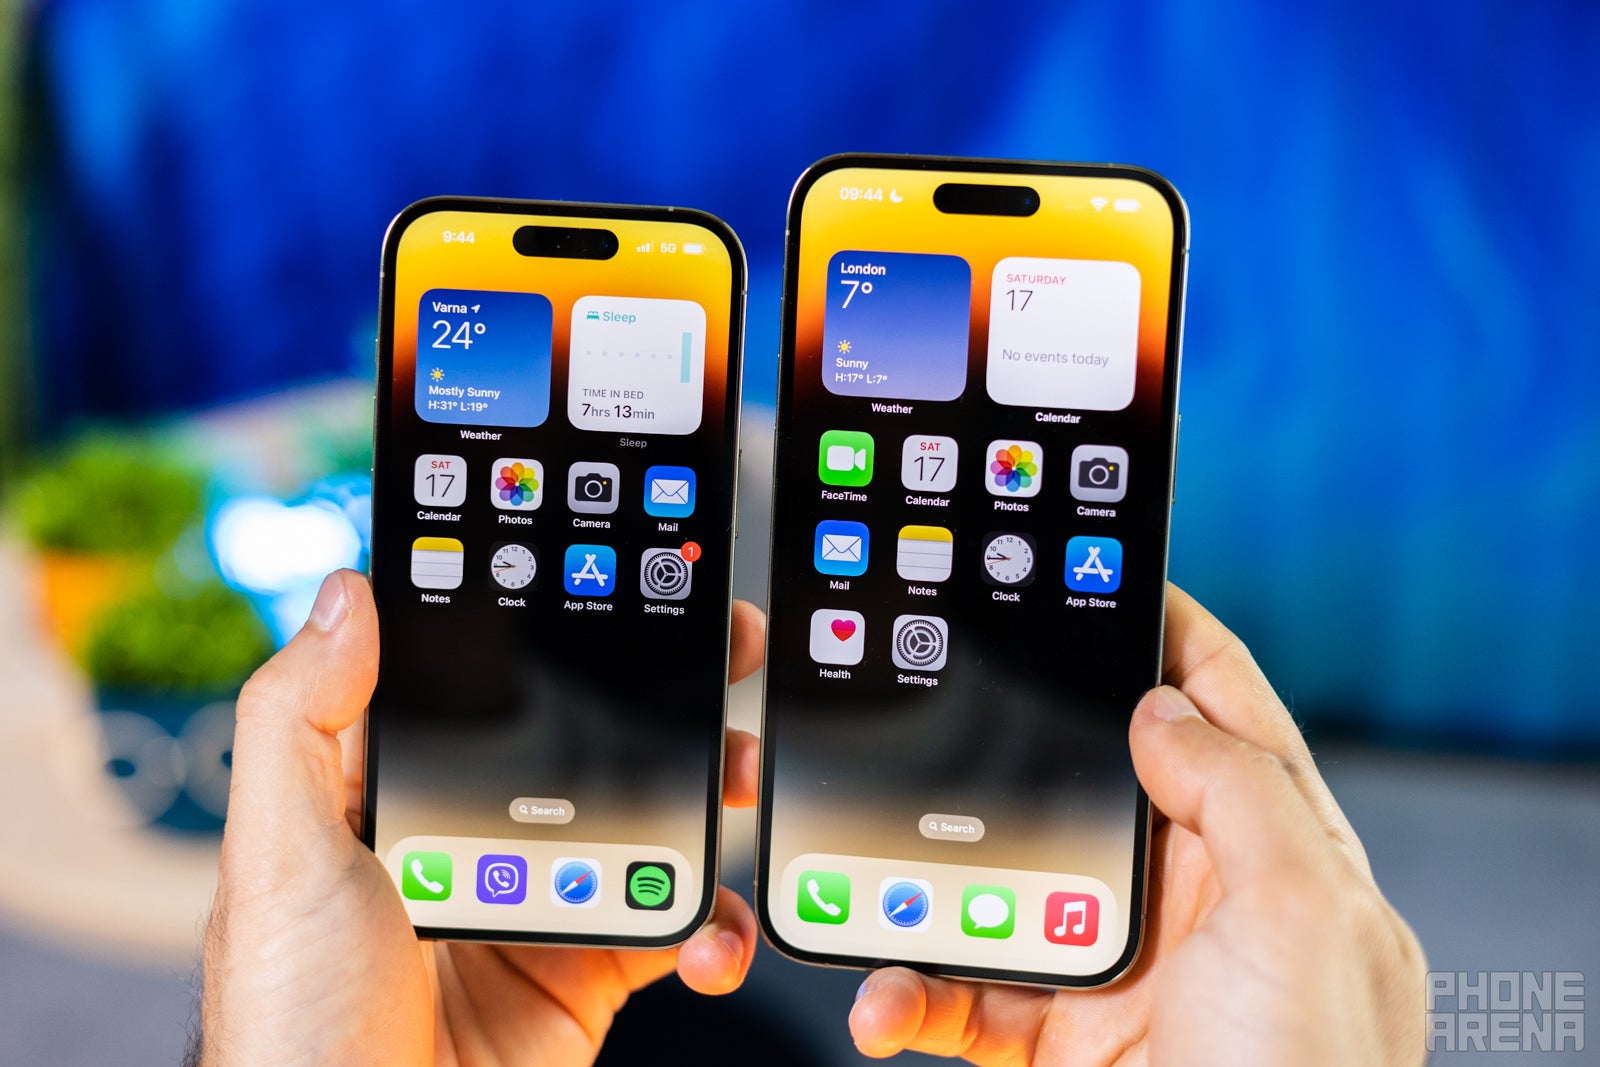 The new Dynamic Island punch hole is the stand-out new feature of the iPhone 14 Pro and iPhone 14 Pro Max (Image Credit - PhoneArena) - Apple iPhone 14 Pro Max vs iPhone 14 Pro: The itch to switch